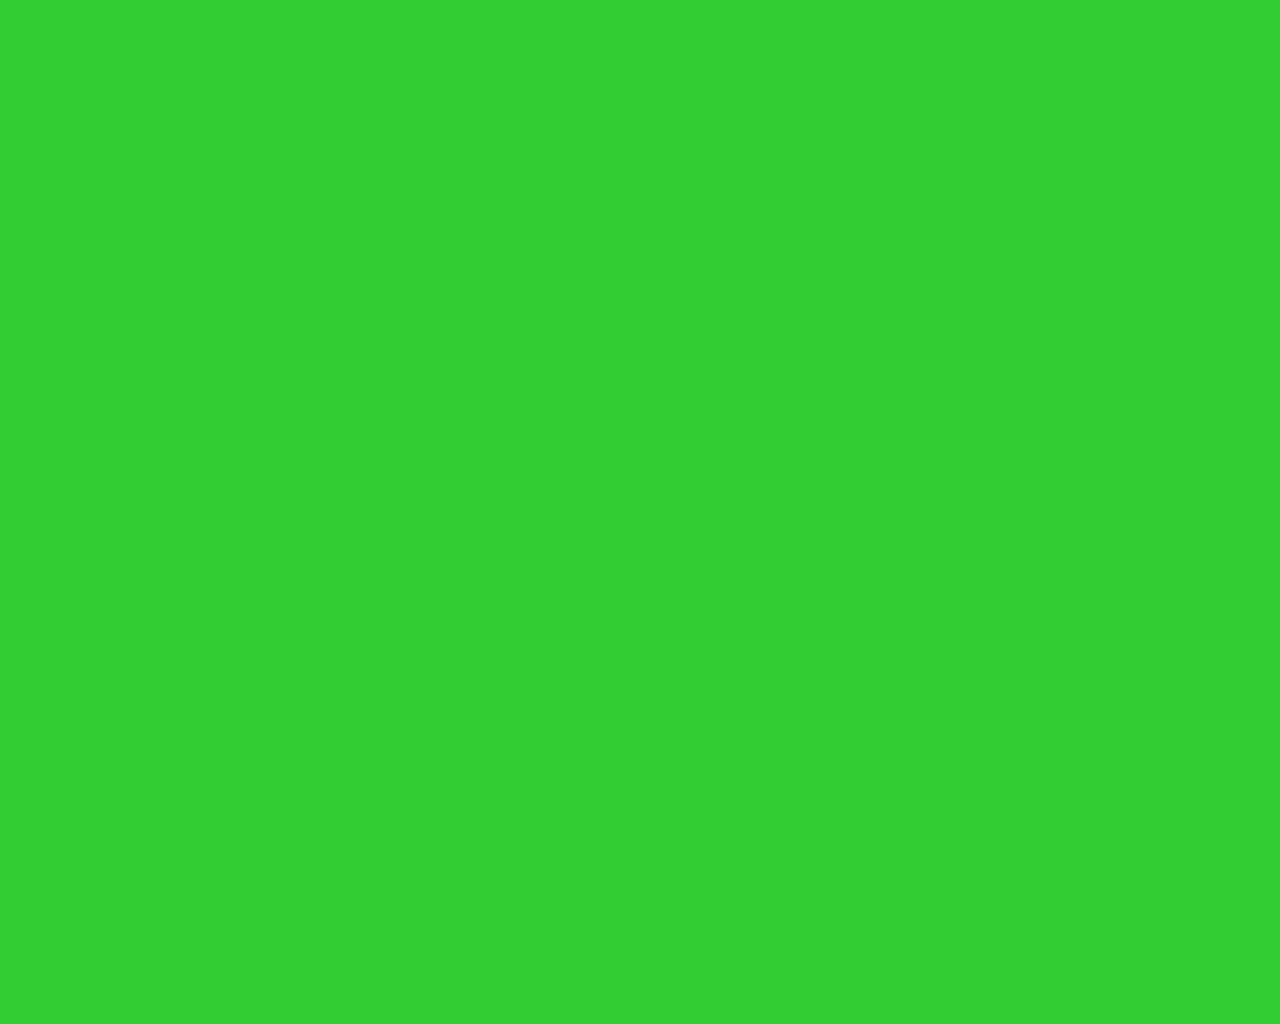 Free 1280x1024 resolution Lime Green solid color background view and 1280x1024